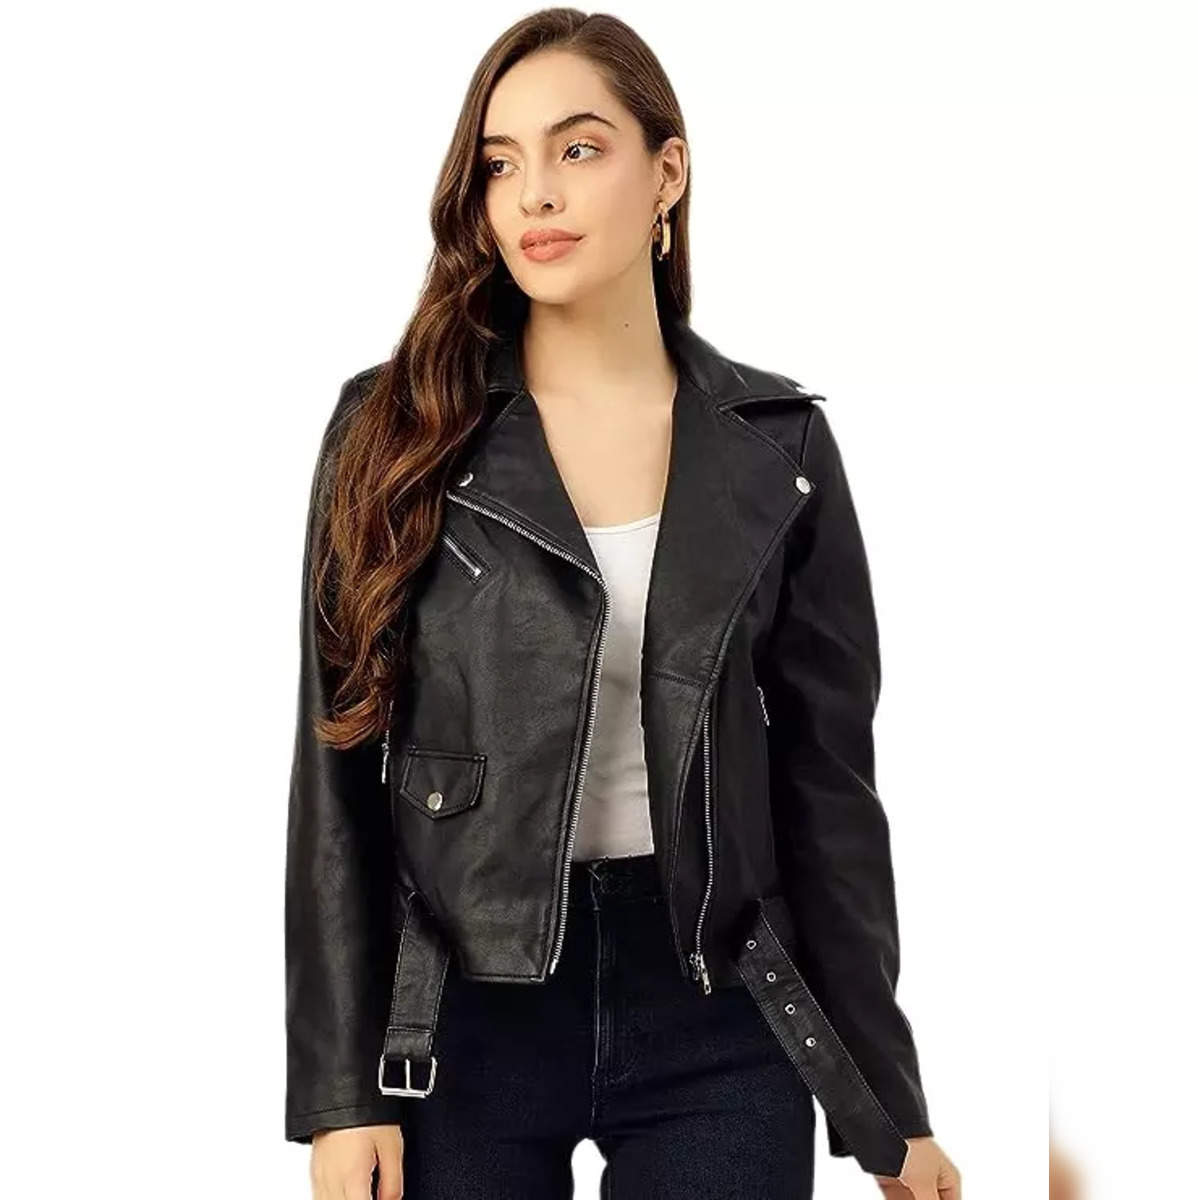 Stylish Utility Jackets for Women Over 50 for Every Budget  Womens utility  jacket, Utility jacket outfit fall, Jackets for women